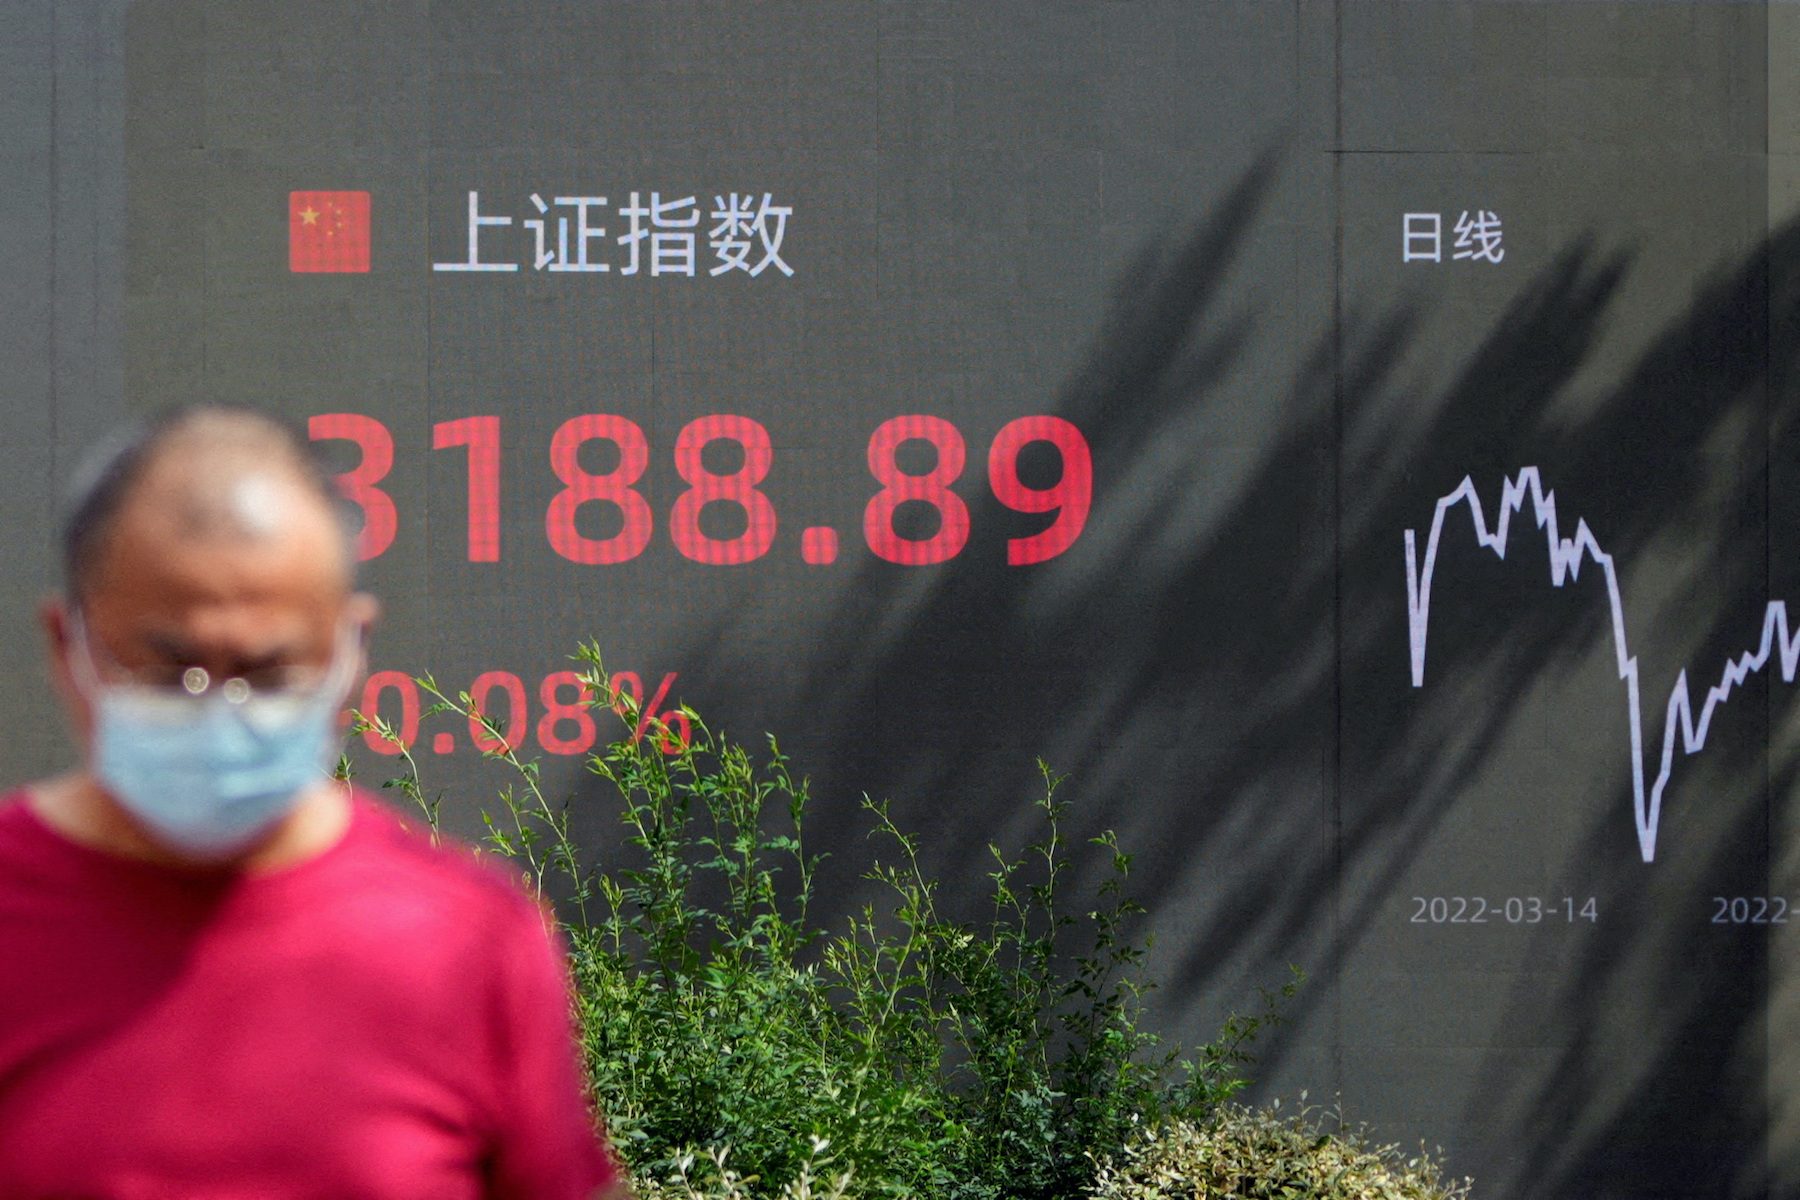 Investors bet China’s rally on easing COVID-19 curbs will be furious but fleeting